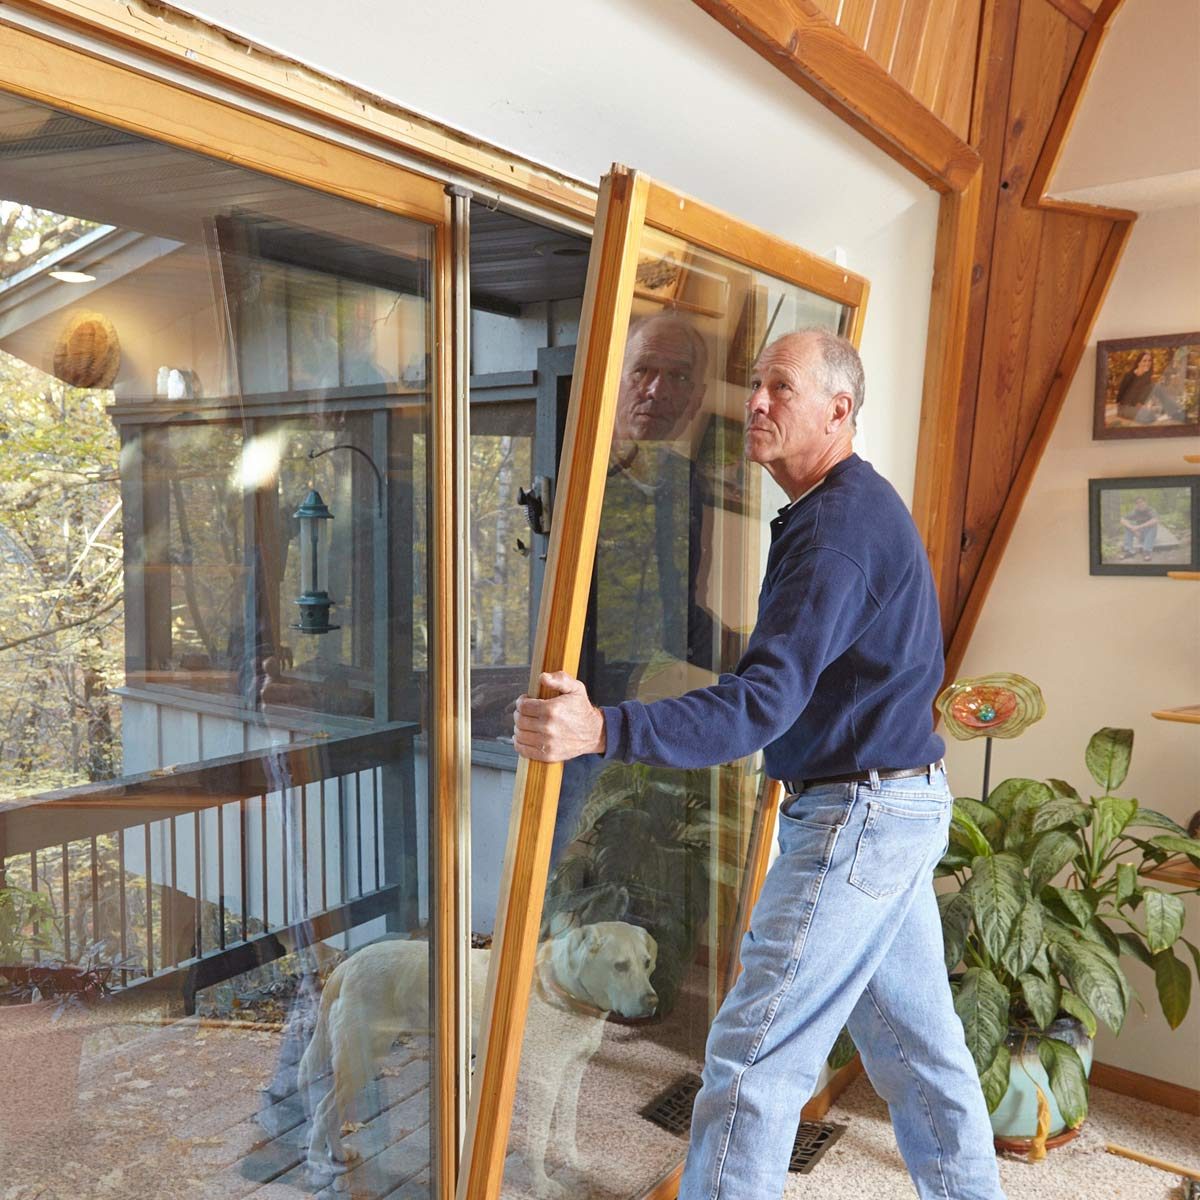 Drafty Patio Door? Weatherstripping Stops Drafts Cold